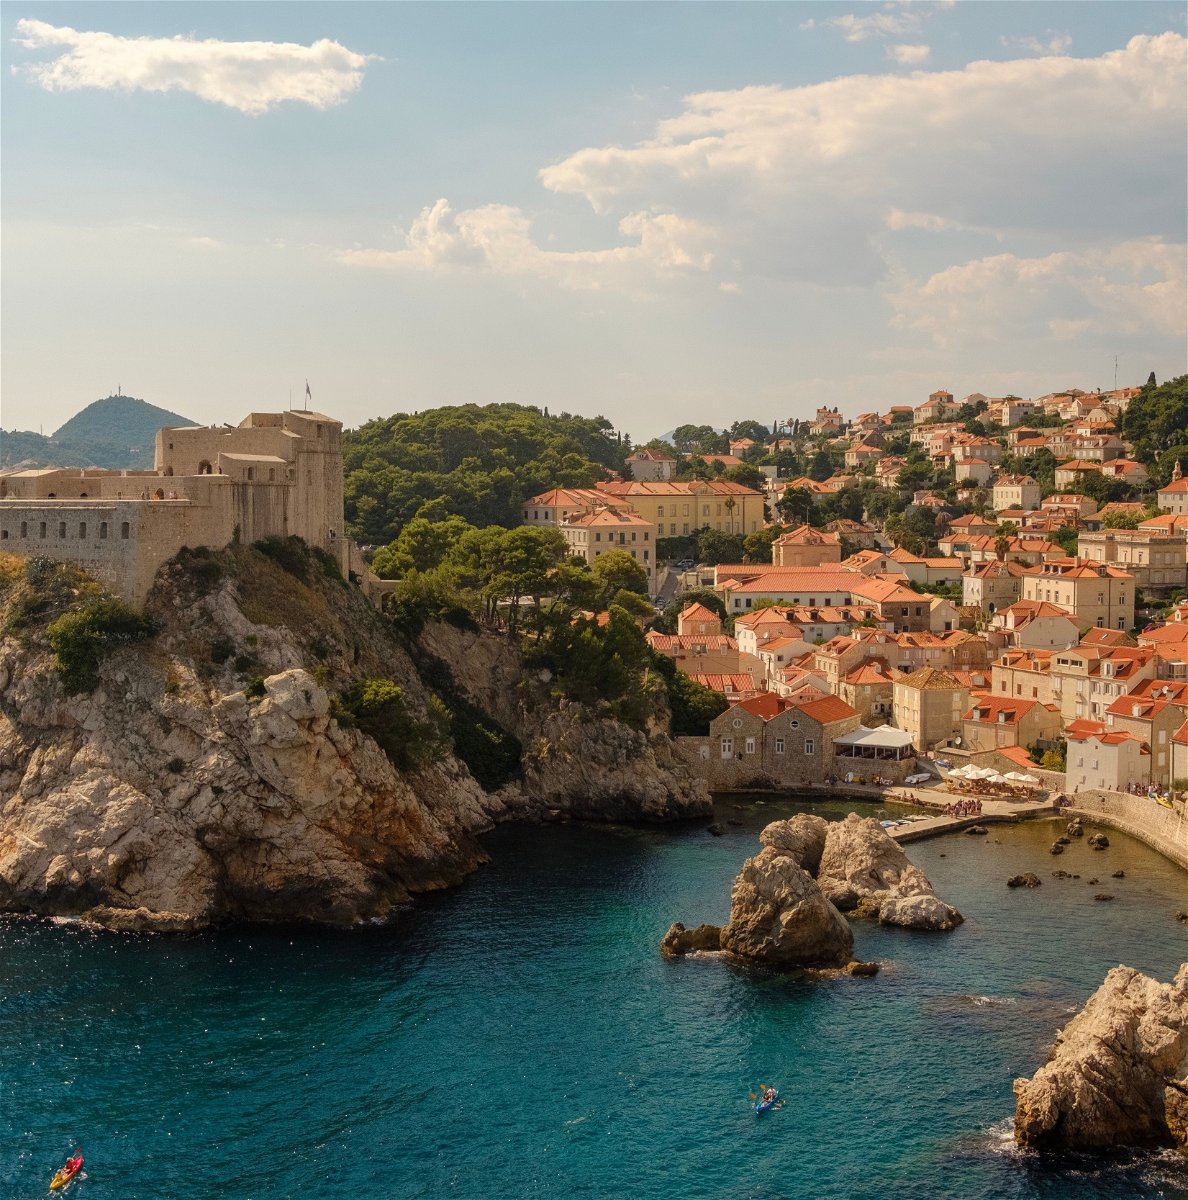 Explore the stunning walled city of Dubrovnik